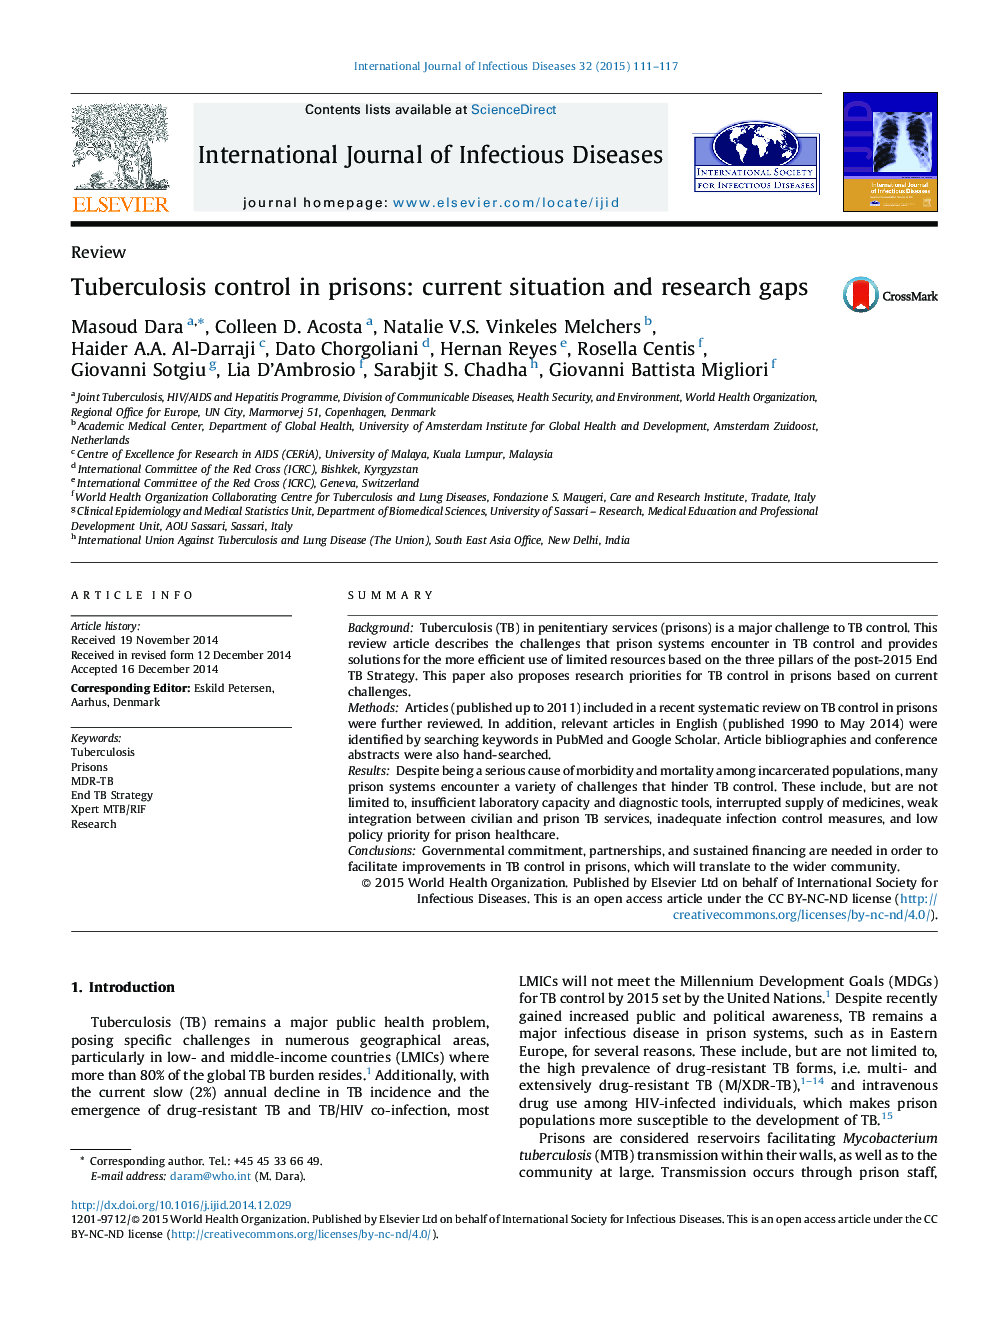 Tuberculosis control in prisons: current situation and research gaps